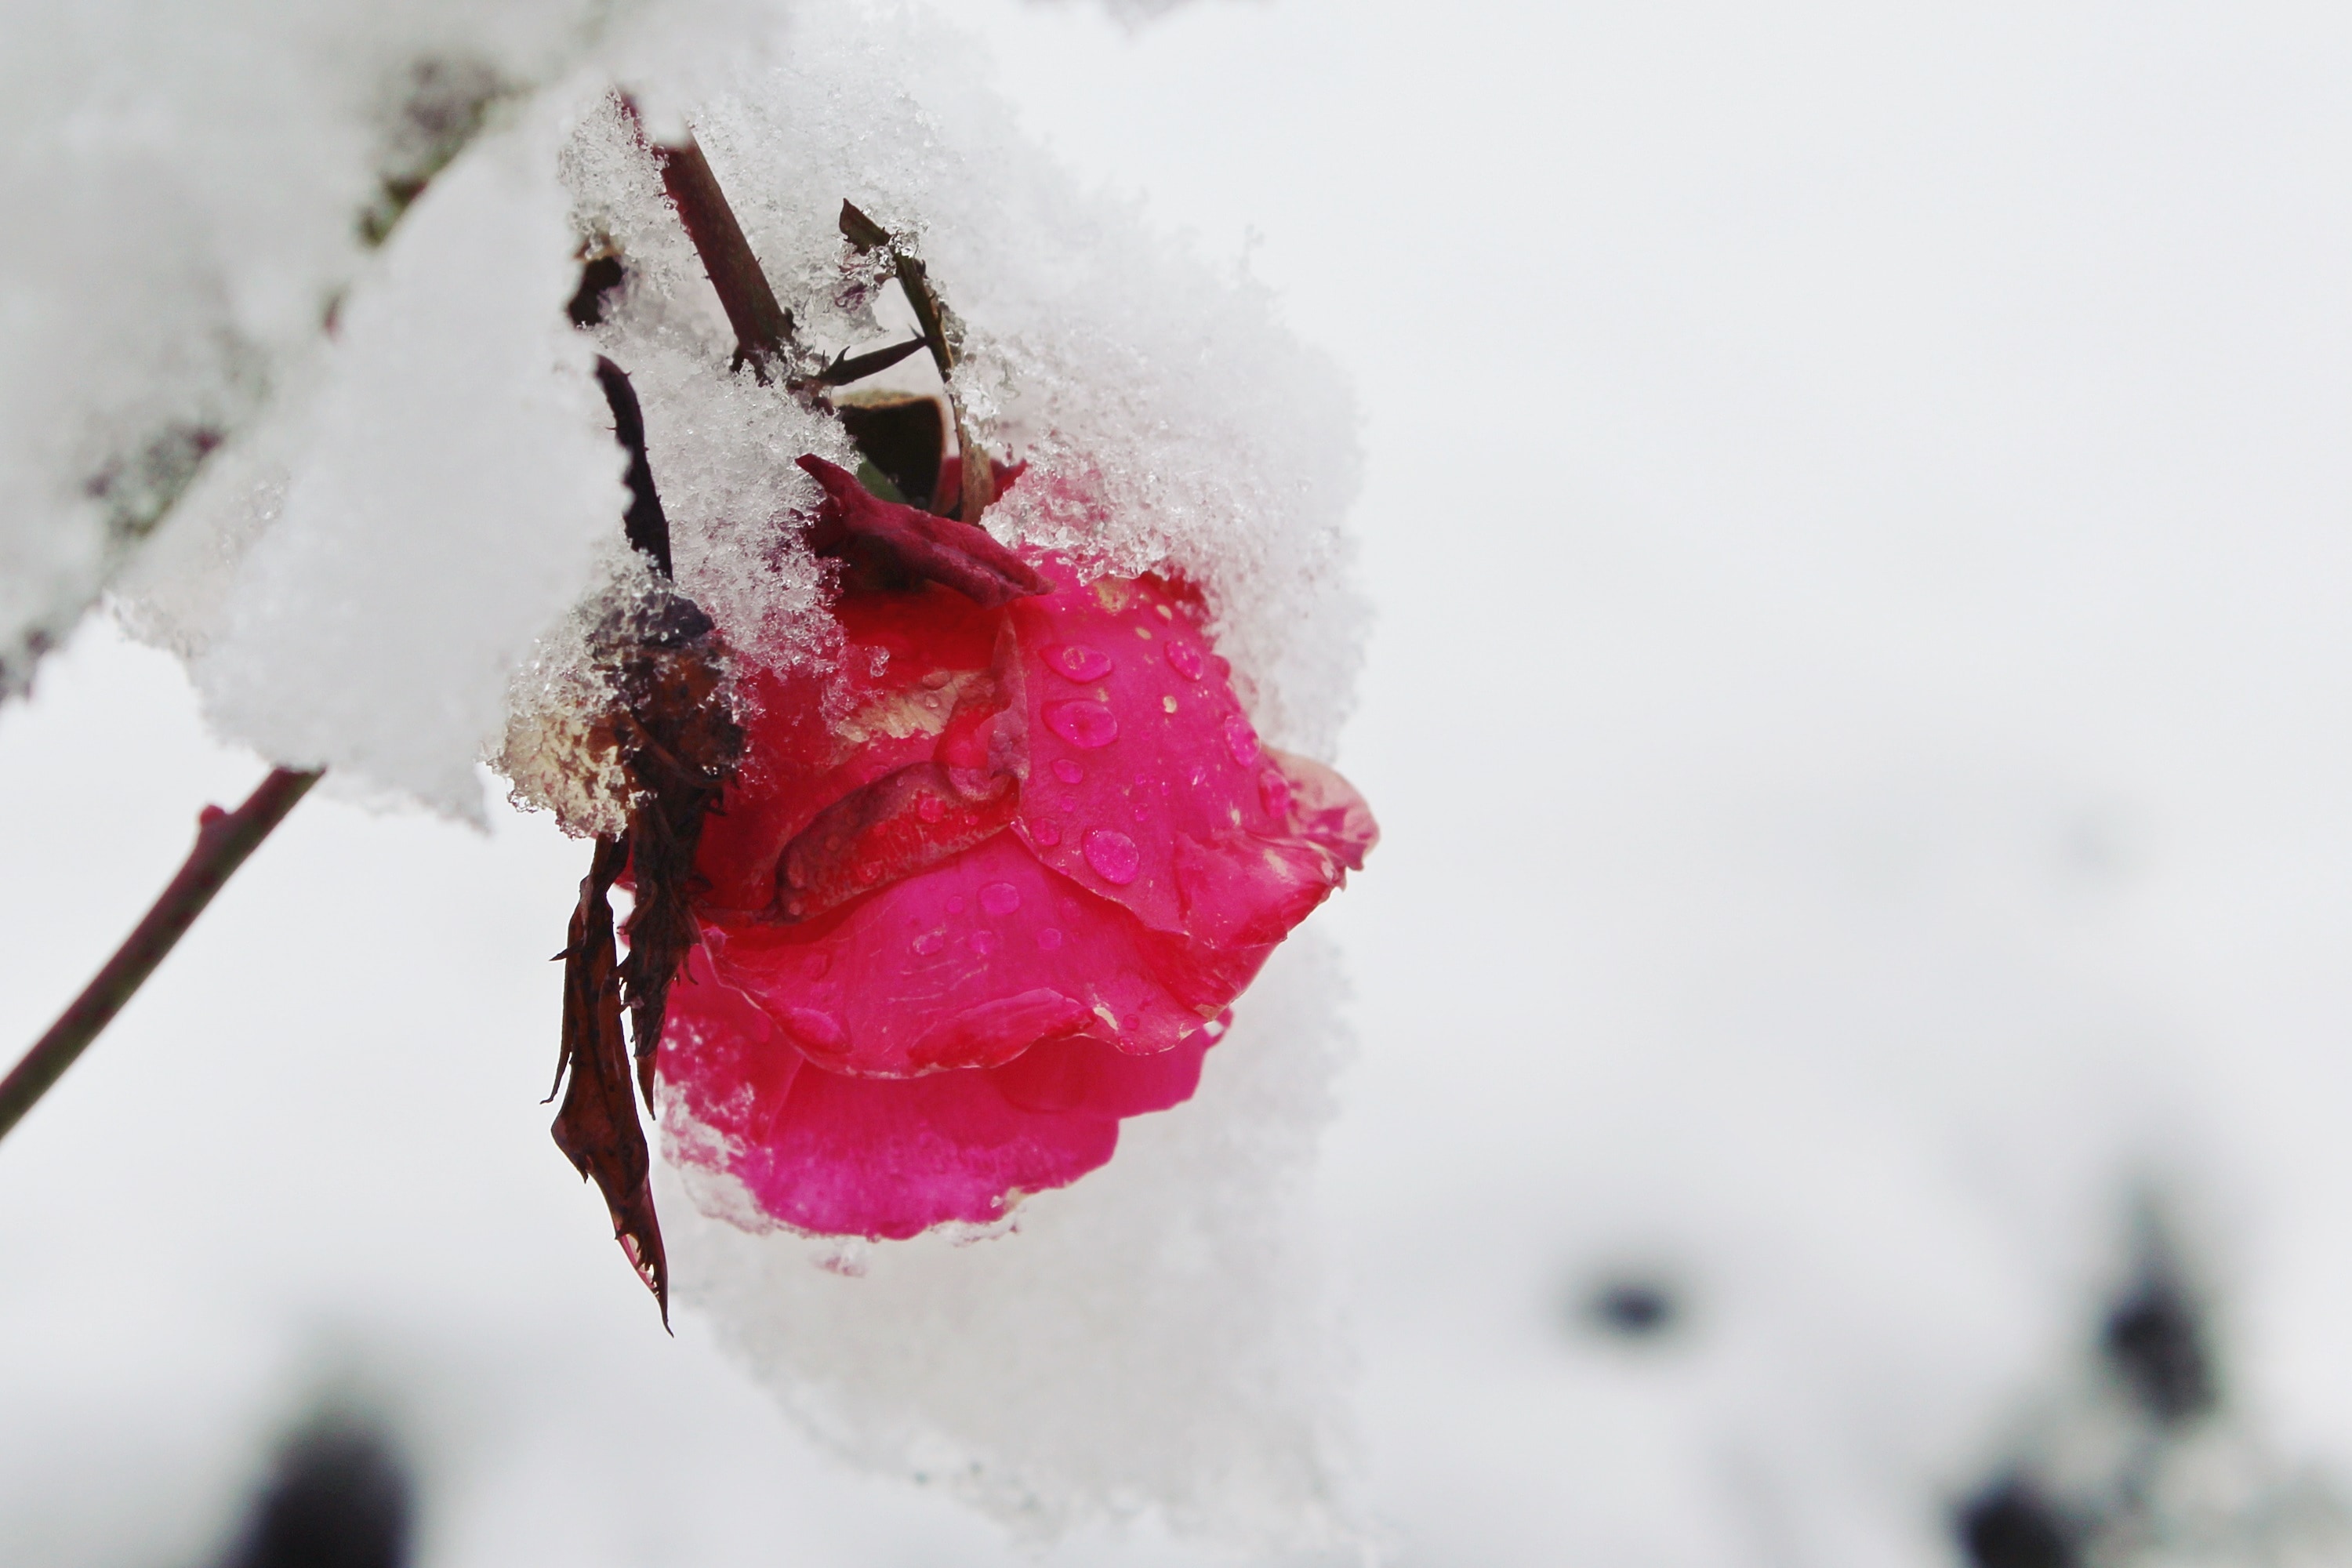 Nature, Rose, Red, Snow, Winter, Covered, snow, cold temperature